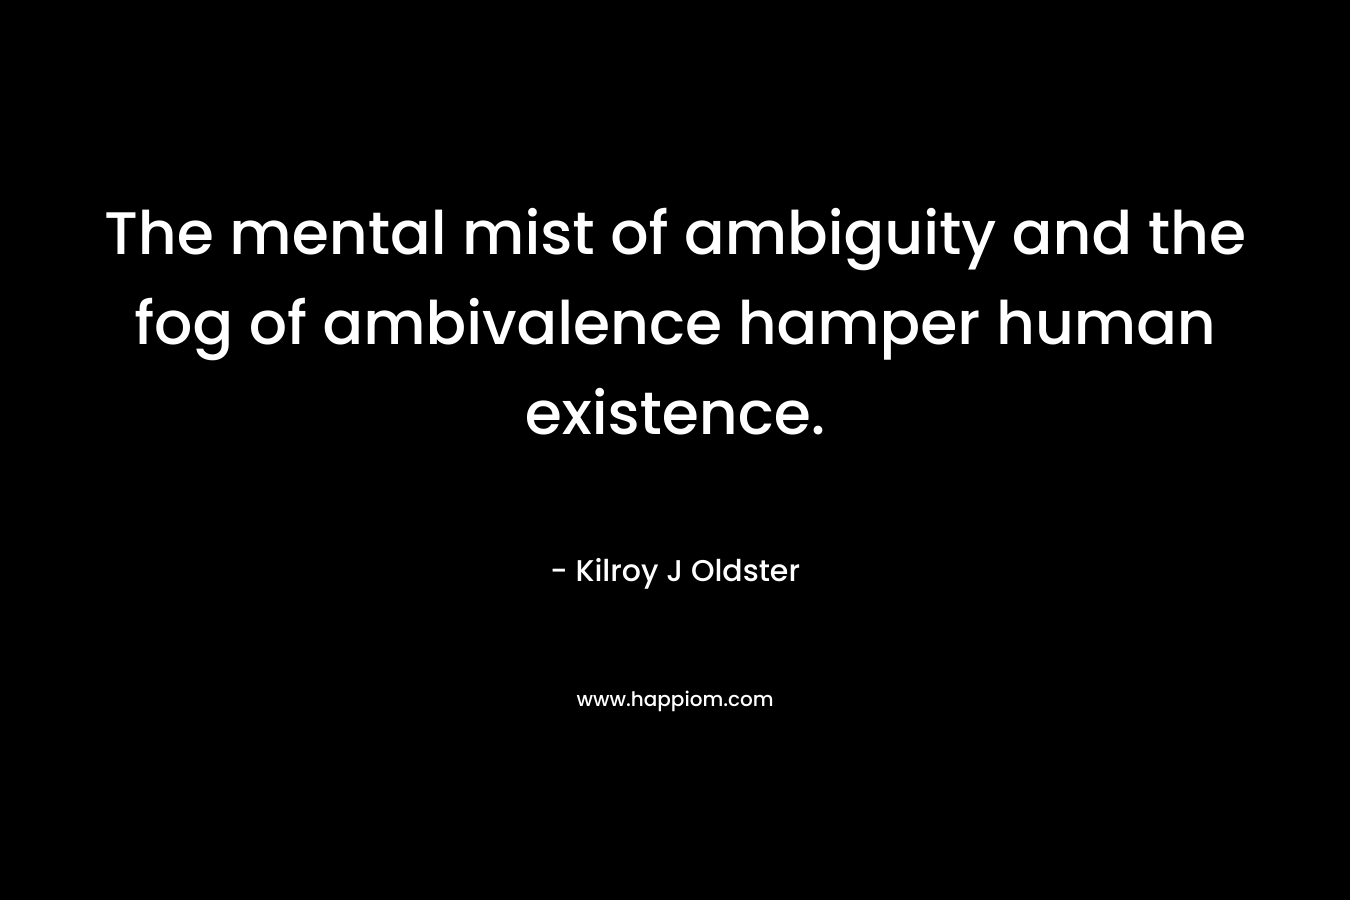 The mental mist of ambiguity and the fog of ambivalence hamper human existence. – Kilroy J Oldster